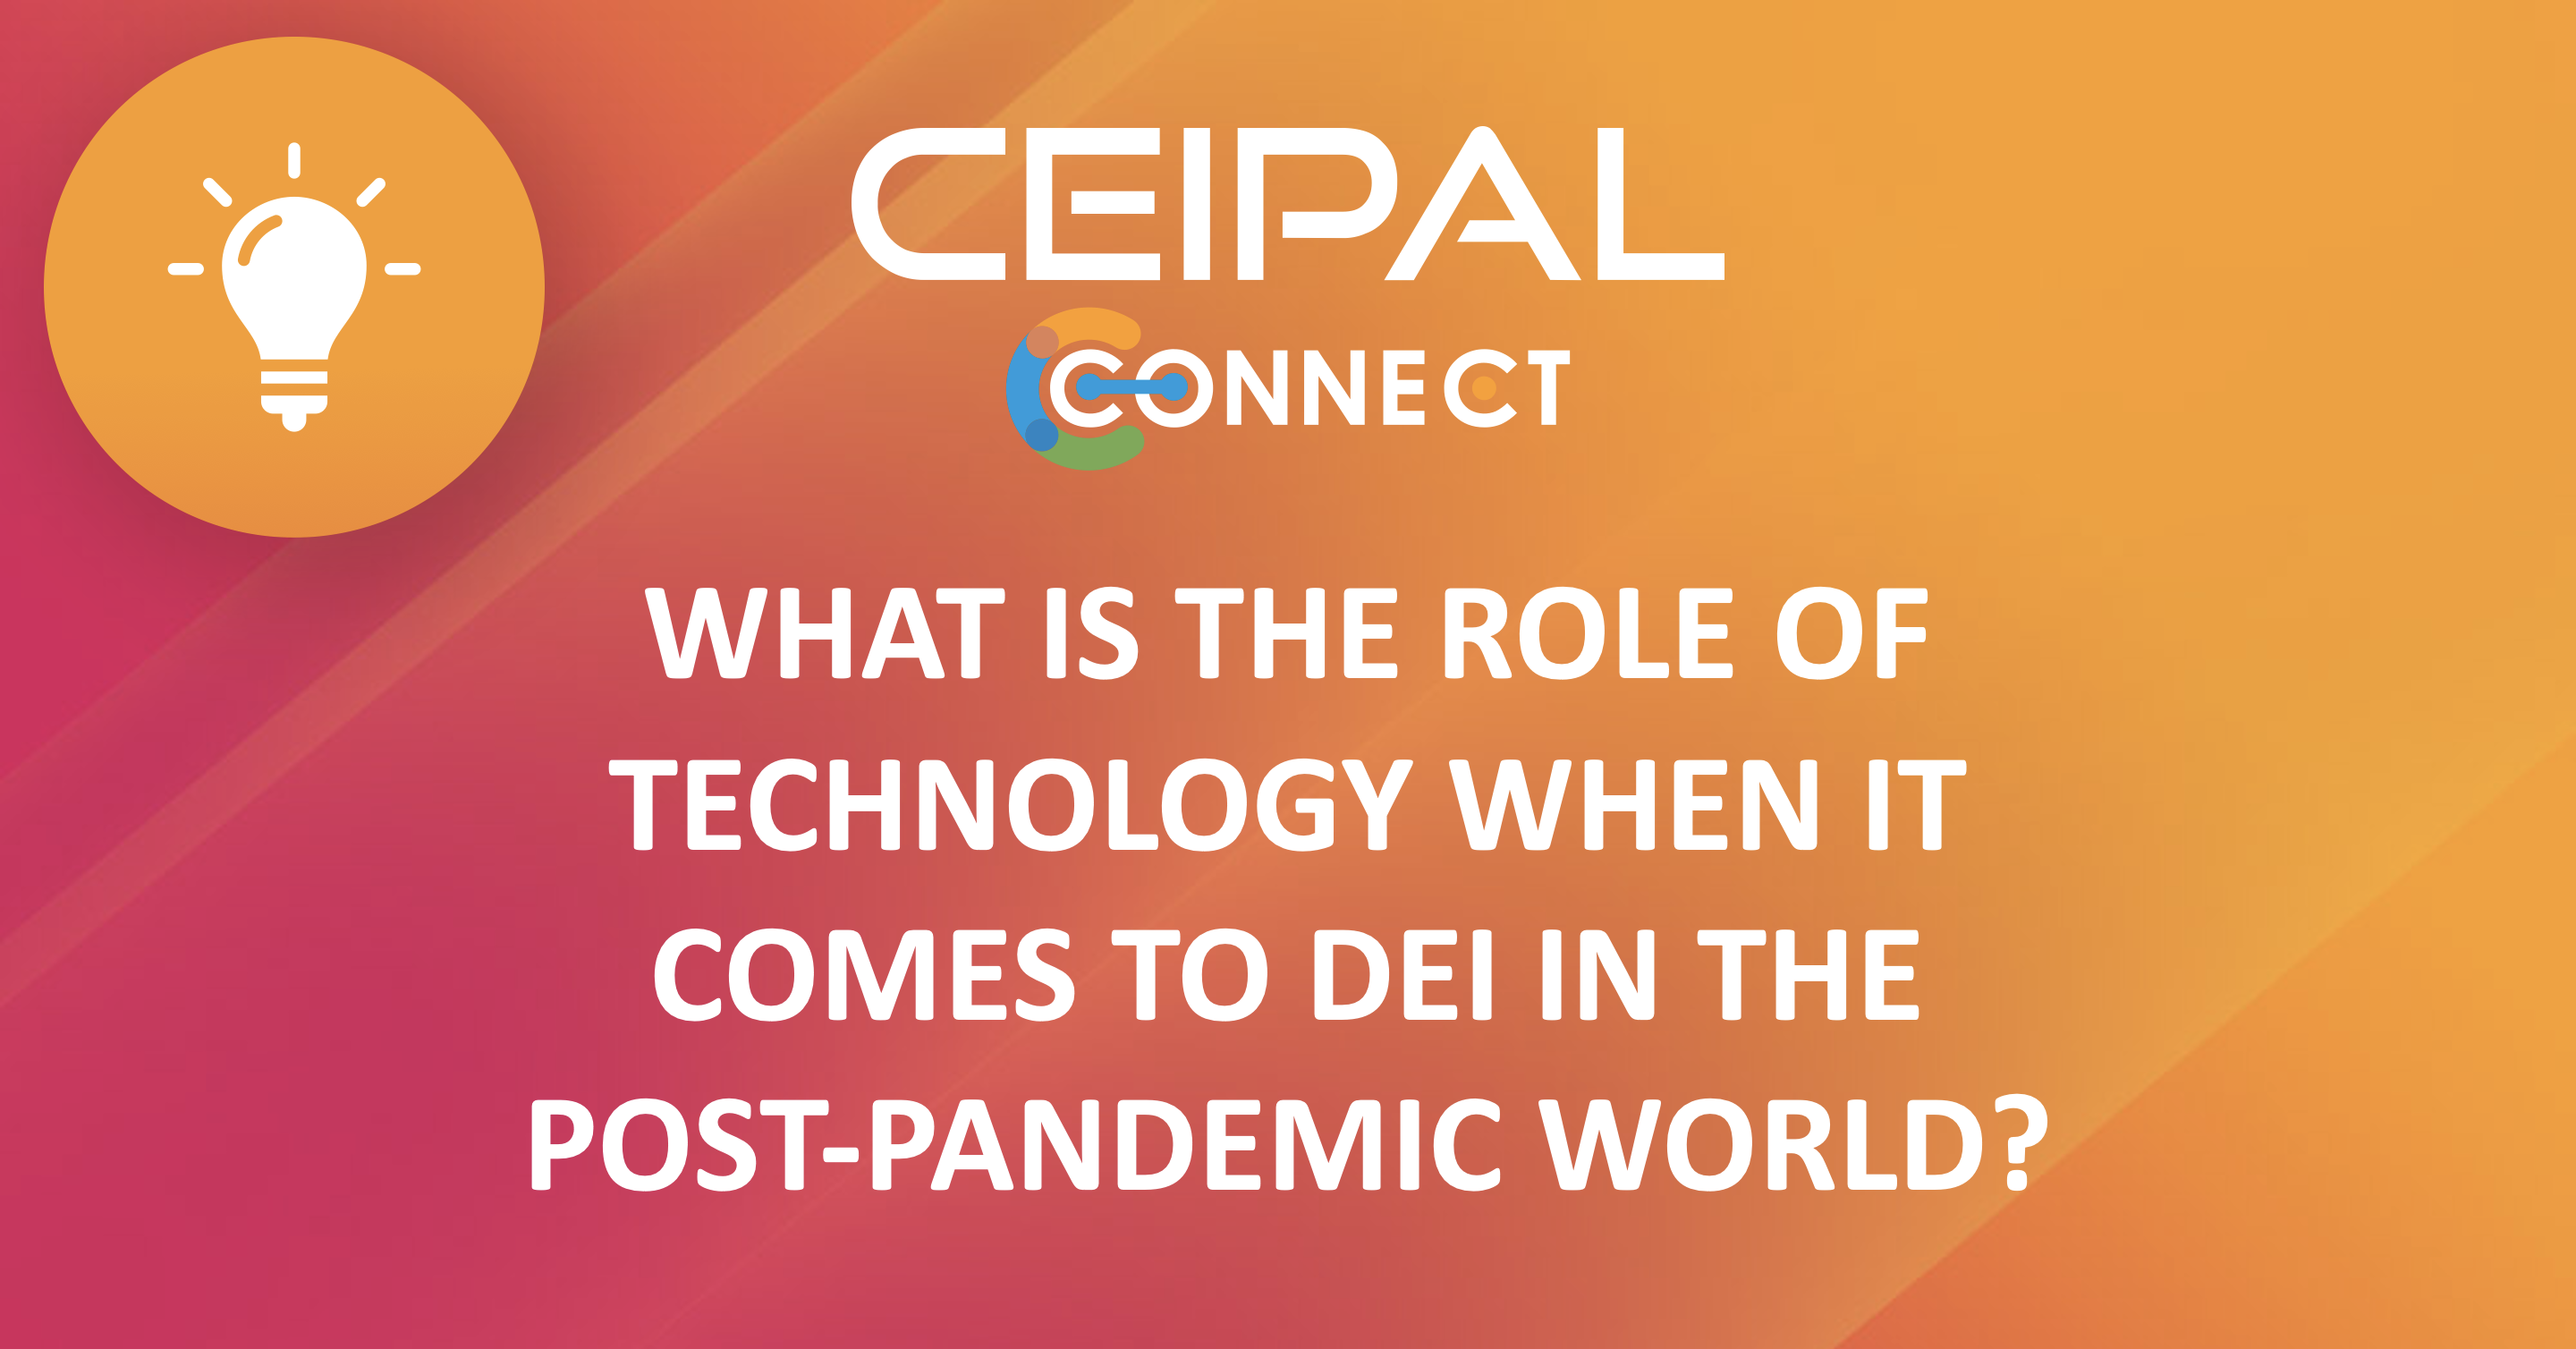 Panel Discussion – What is the Role of Technology When it Comes to DEI in the Post-pandemic World?